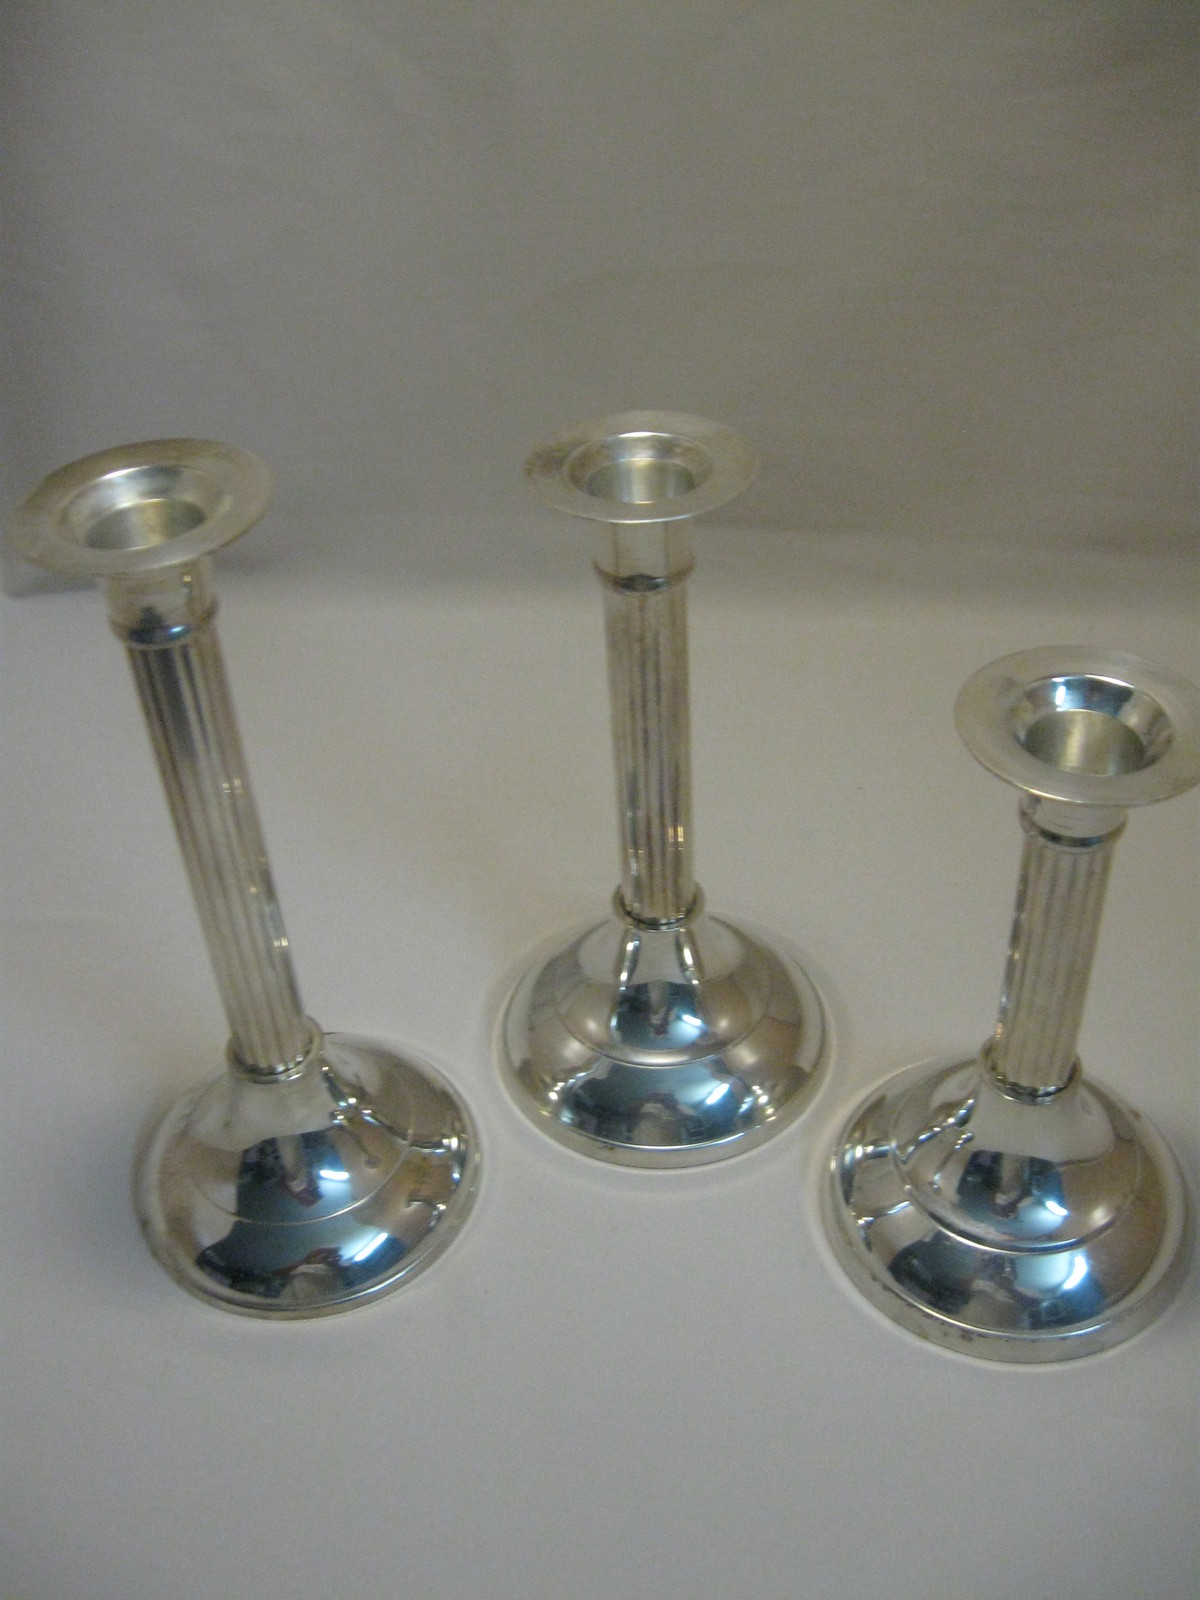 International Silver Co Silver Plate Qty 3 Flute Candle Stick Holders - $12.95